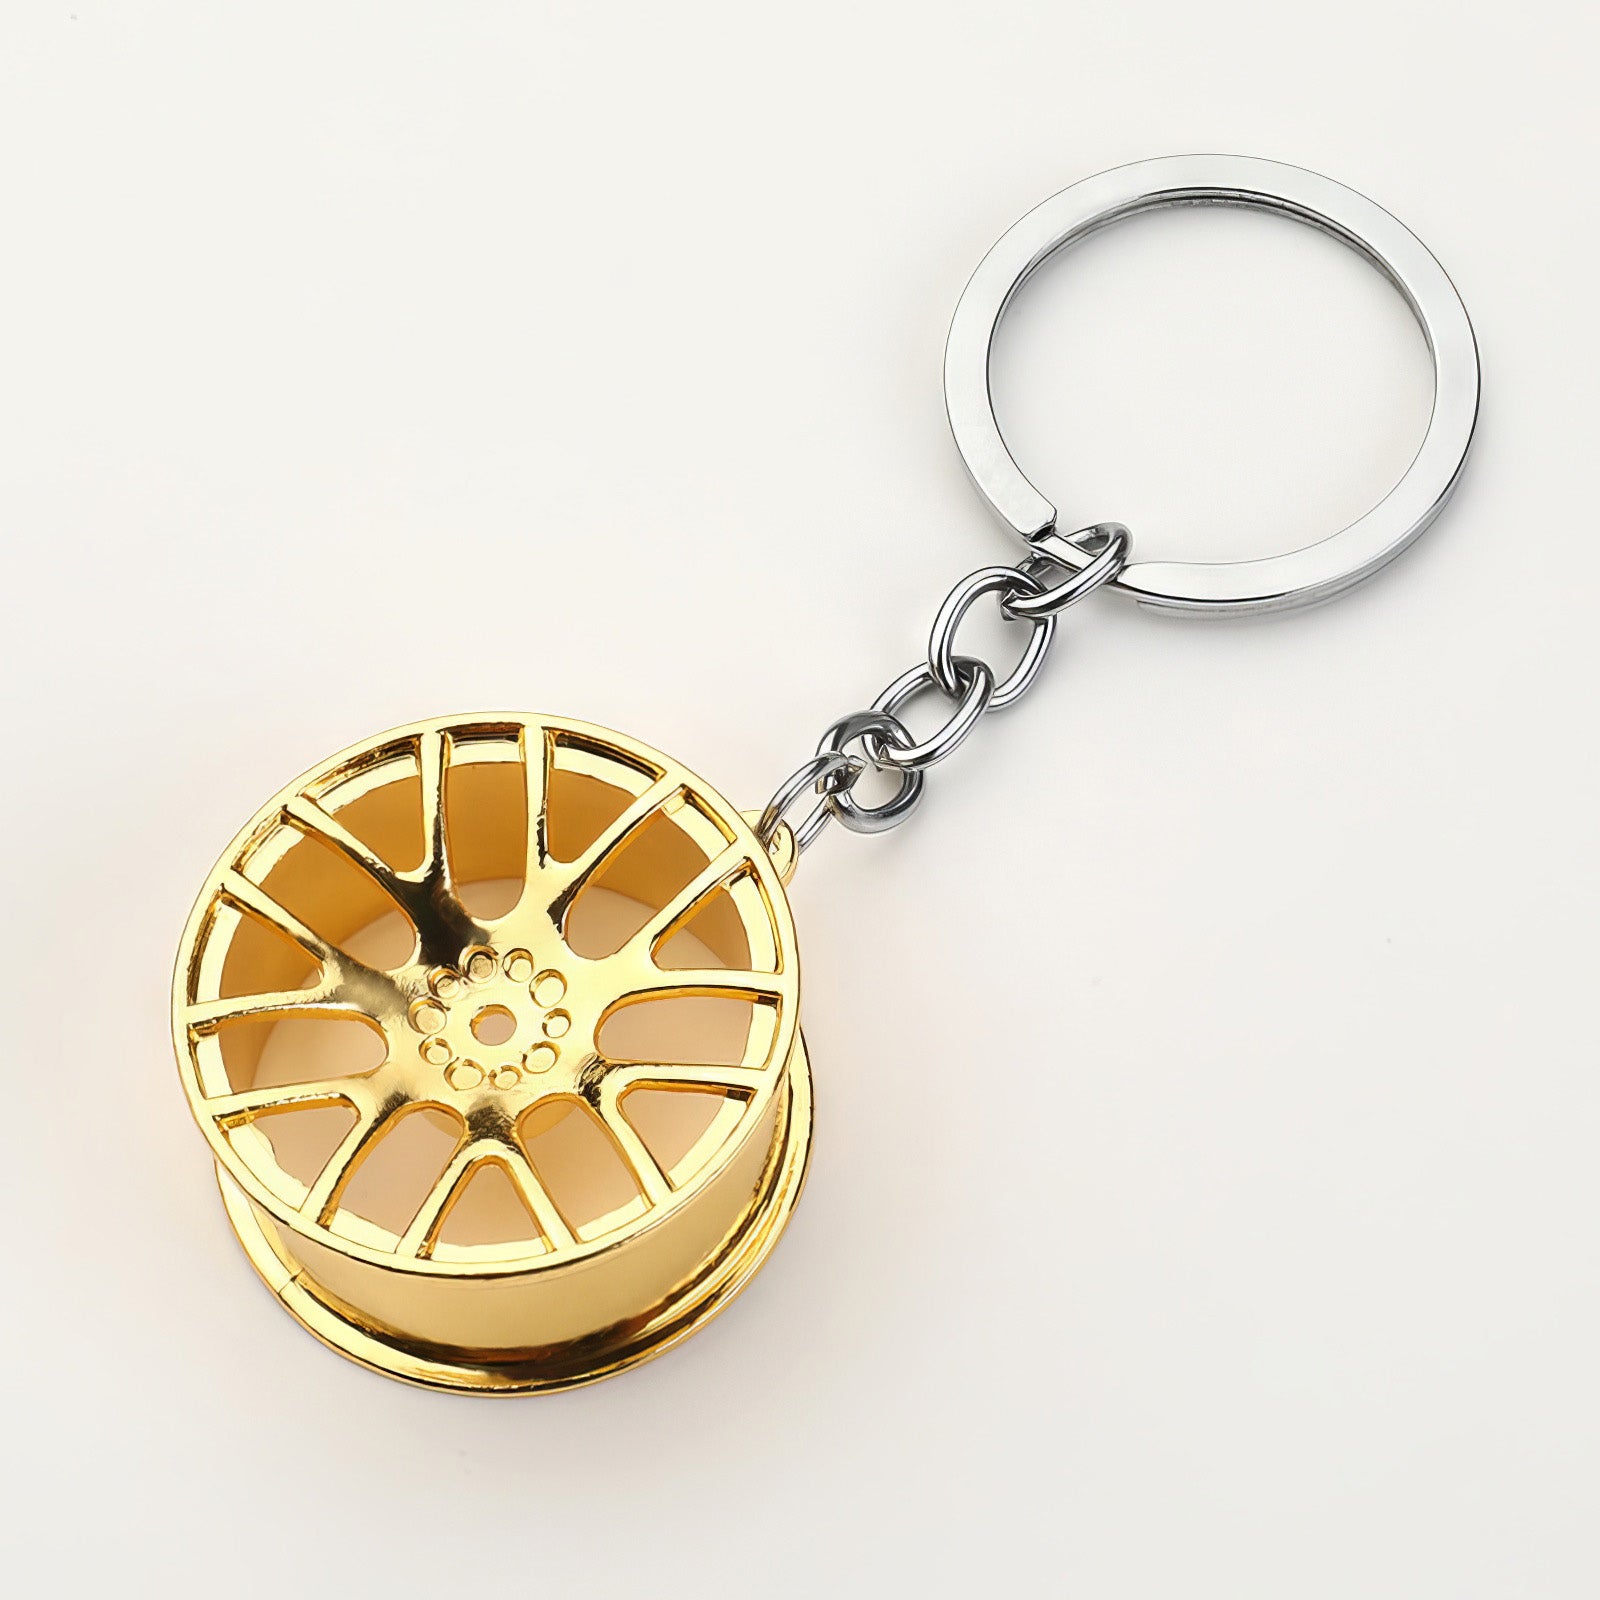 Concave wheel keychain in gold.